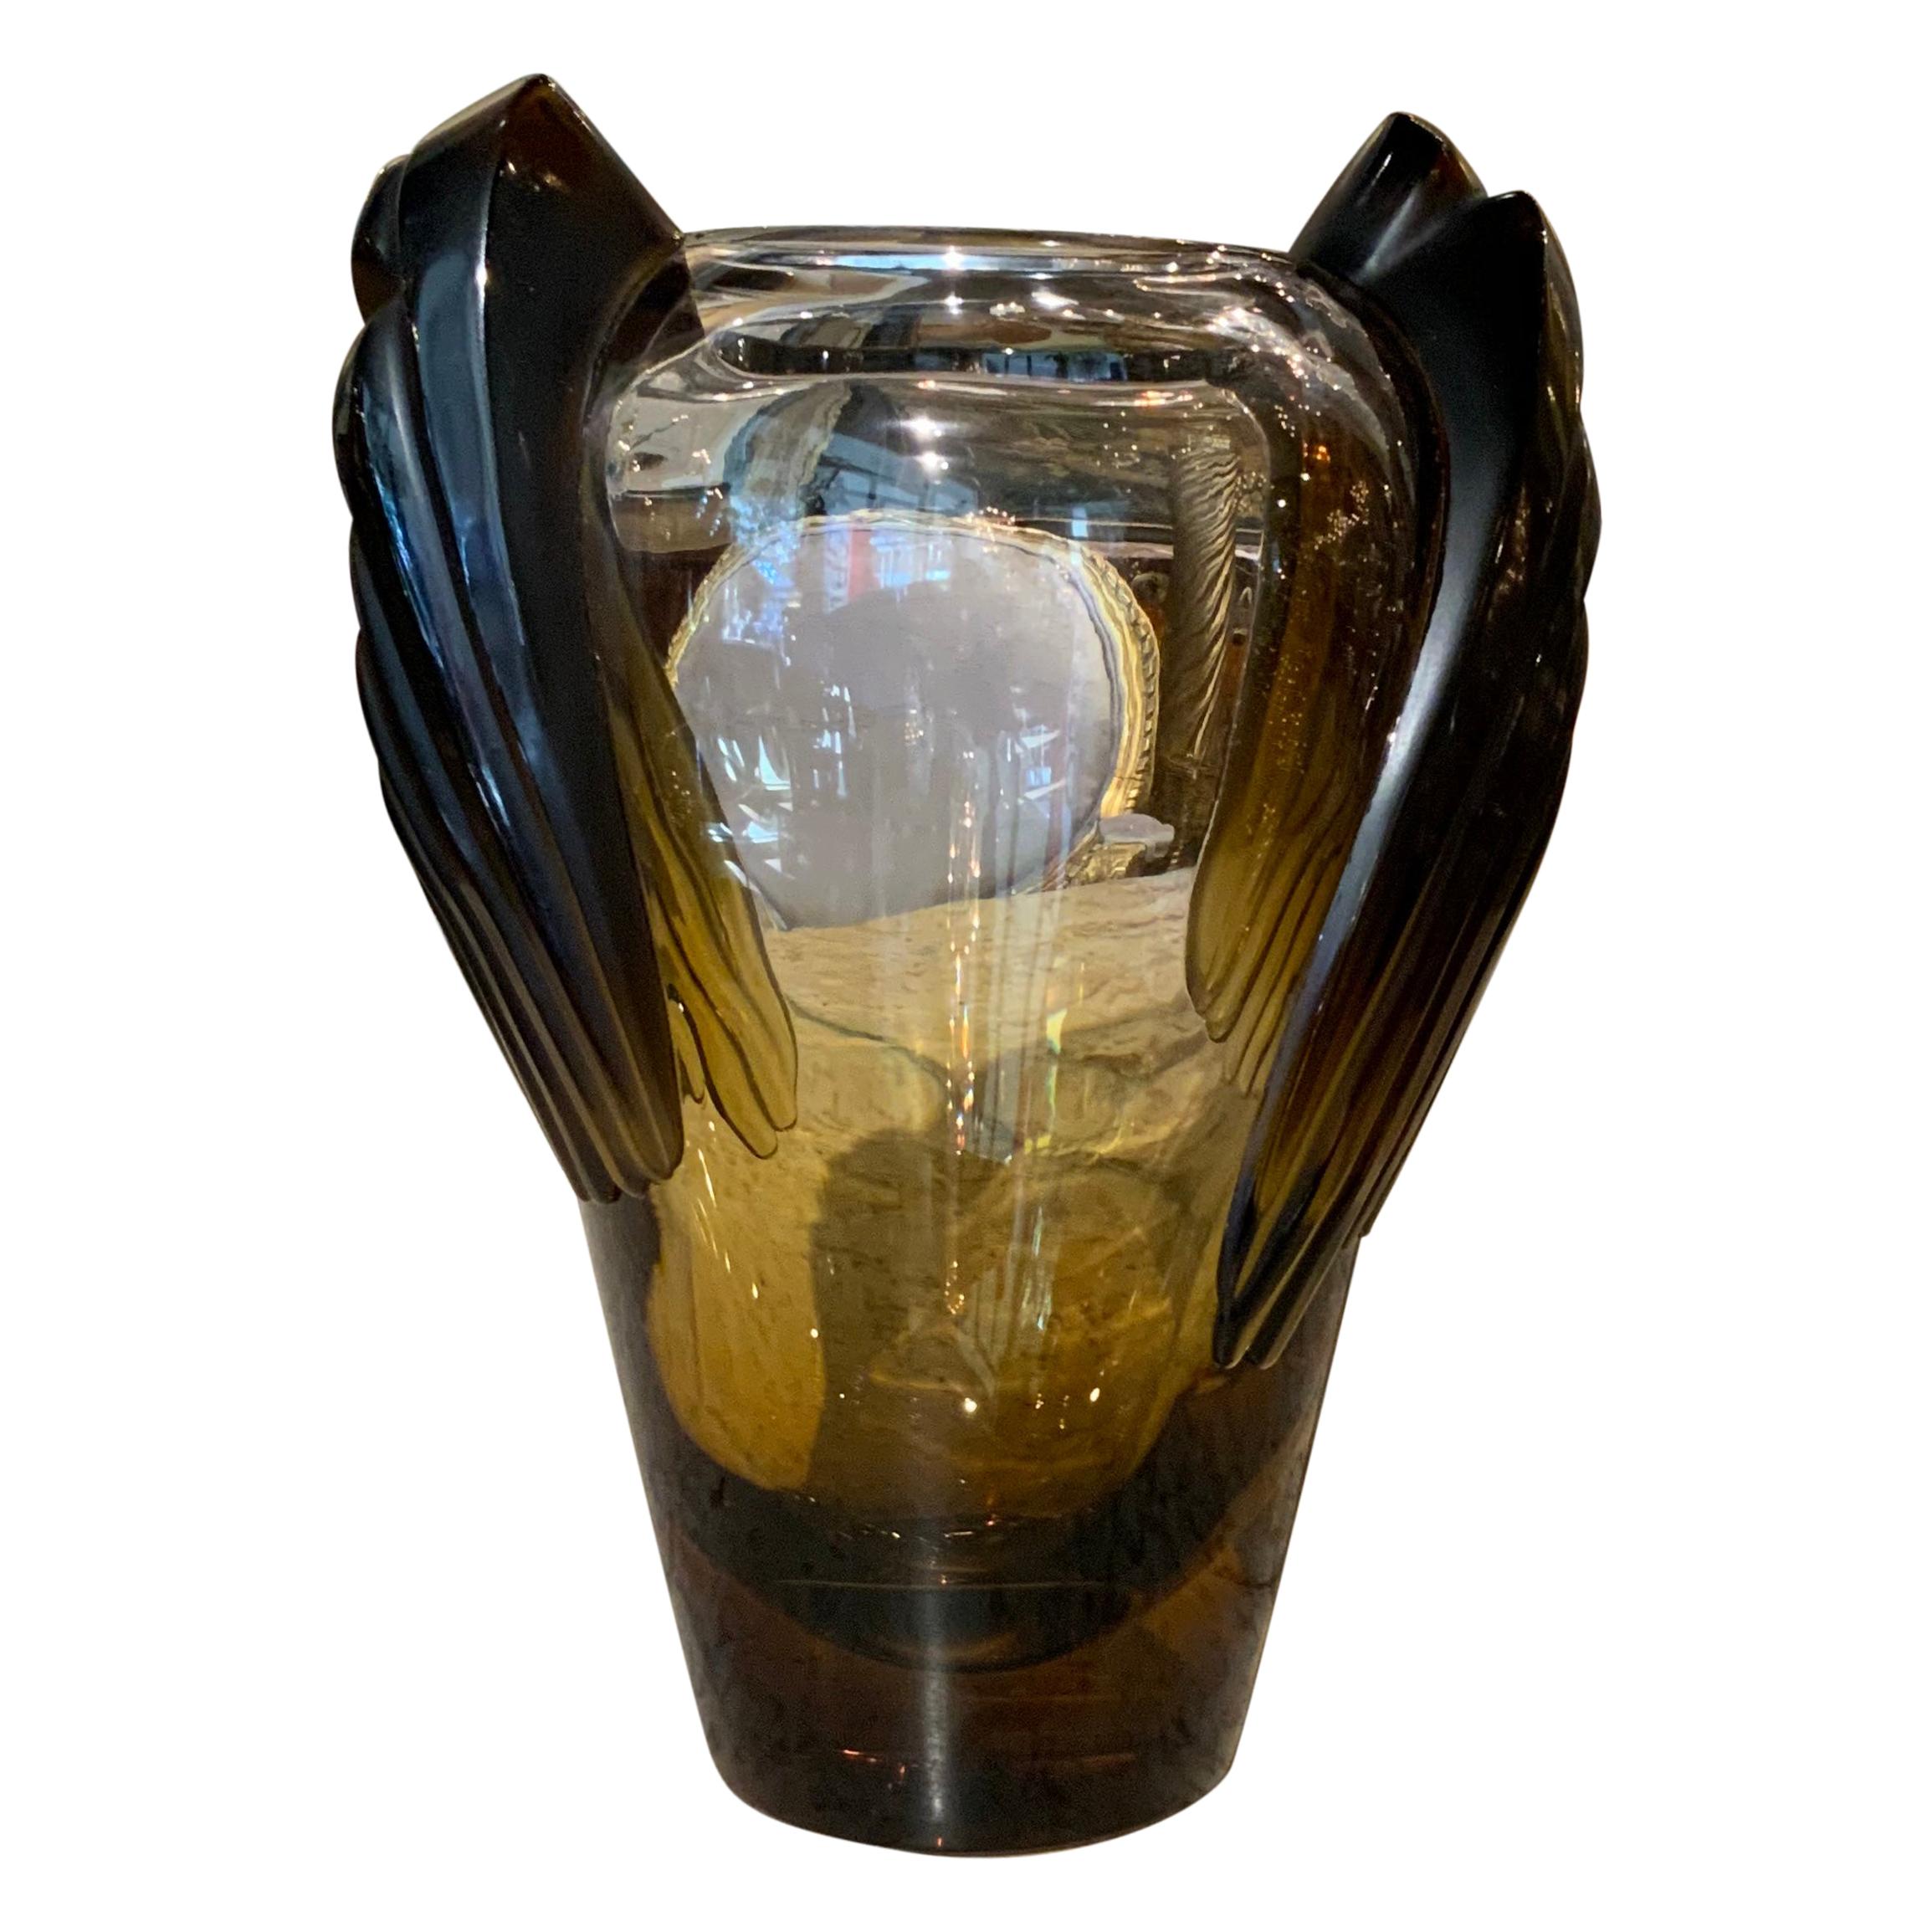 Lalique Vase “Marrakesh” in Smoked Amber Glass, Art Deco Style For Sale